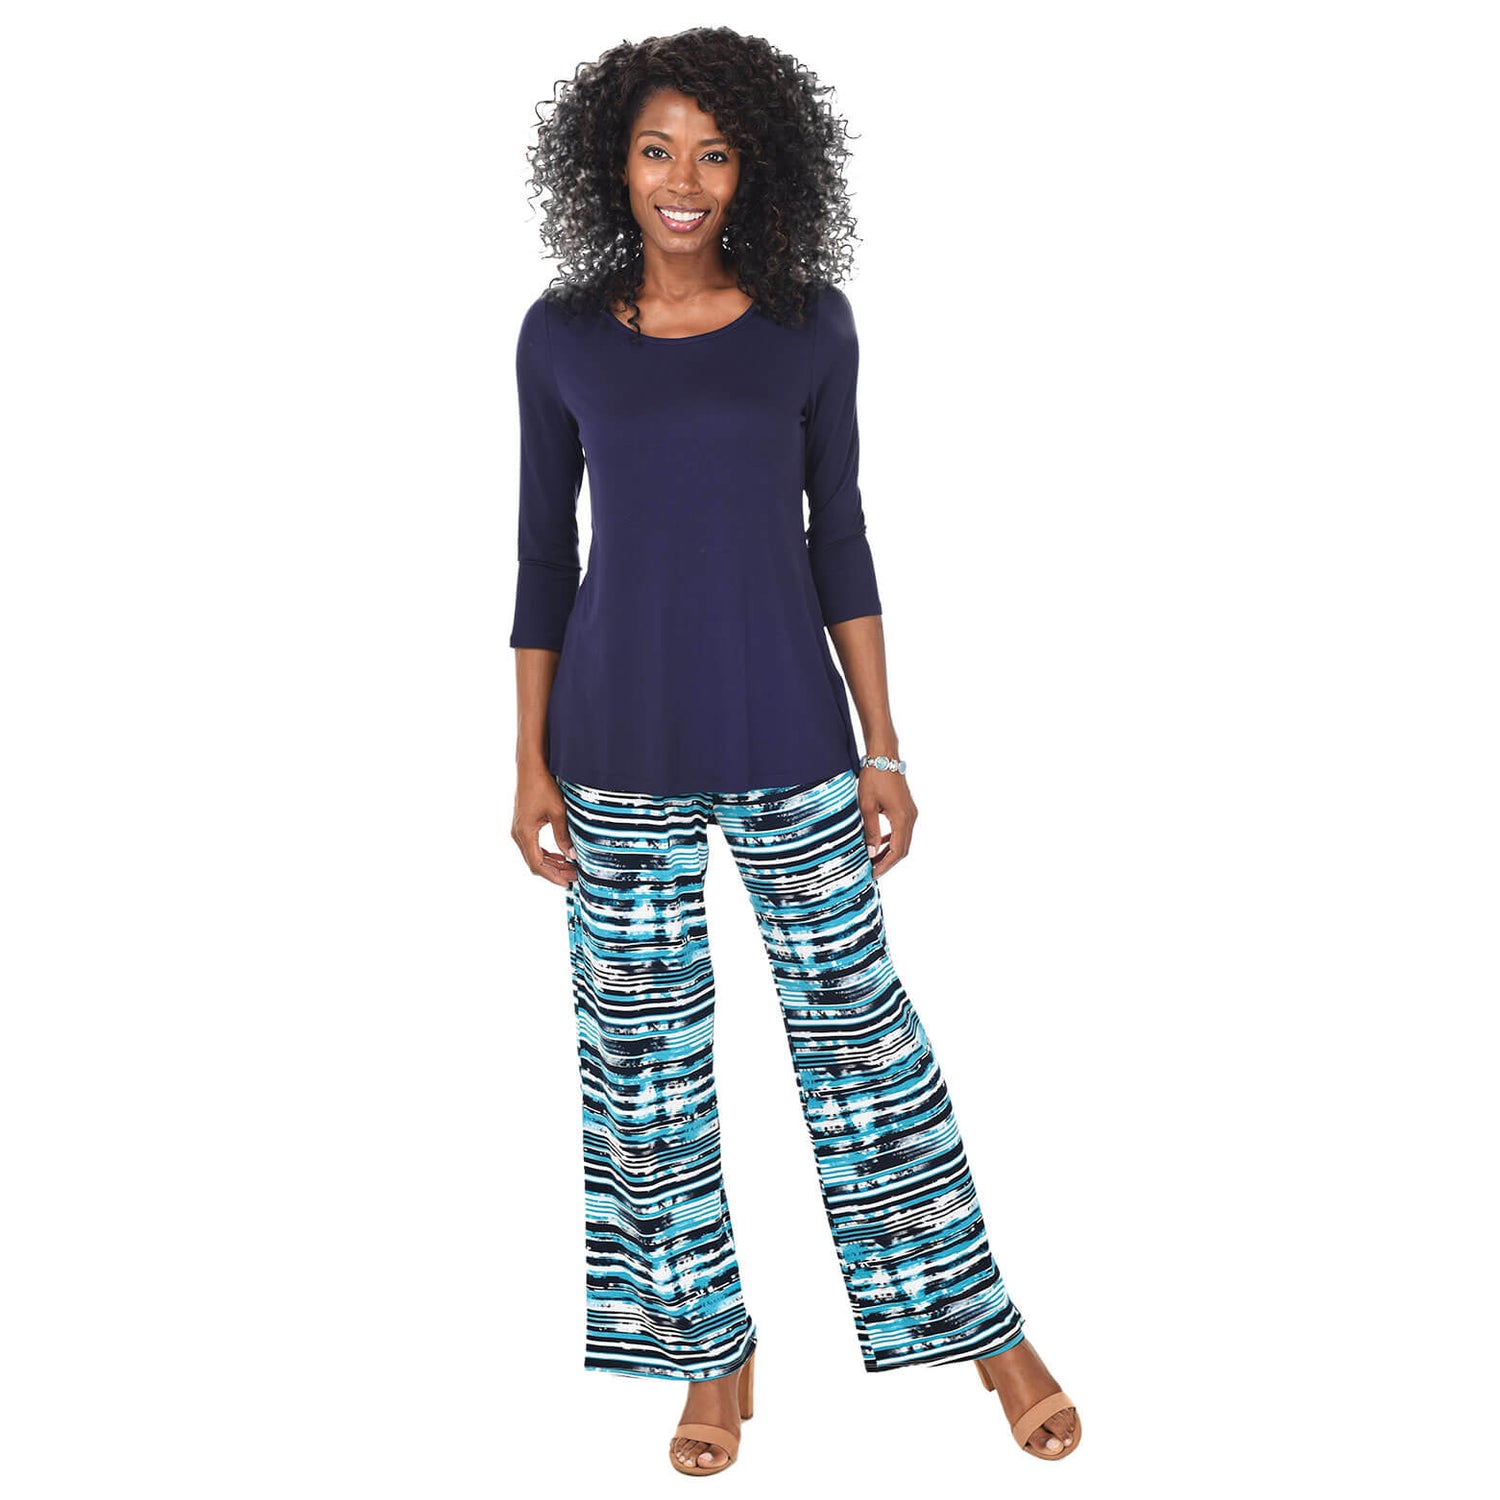 A comfortable palazzo or a flattering and versatile pair of